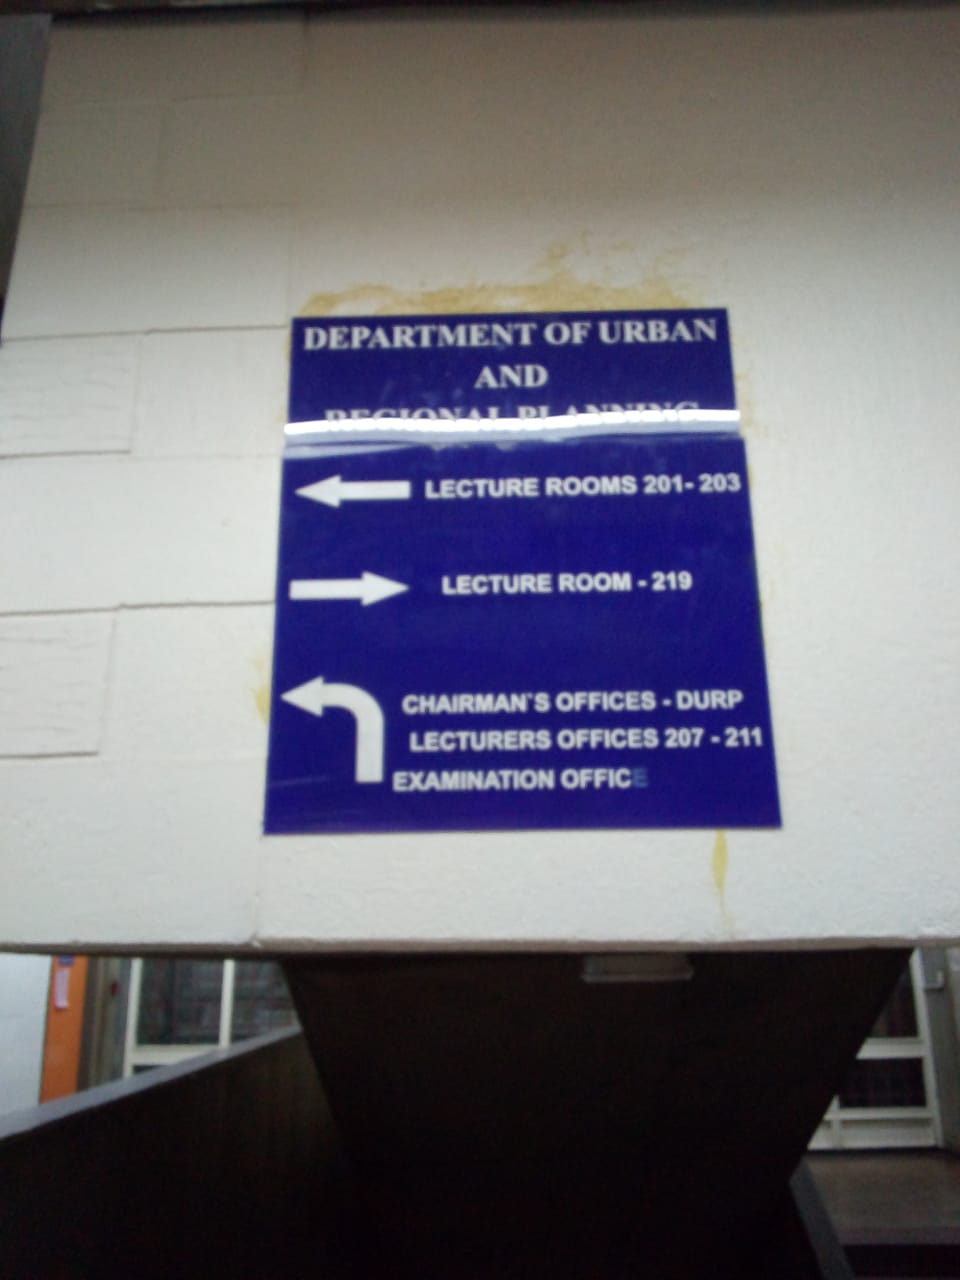 Sign Board showing location of spaces